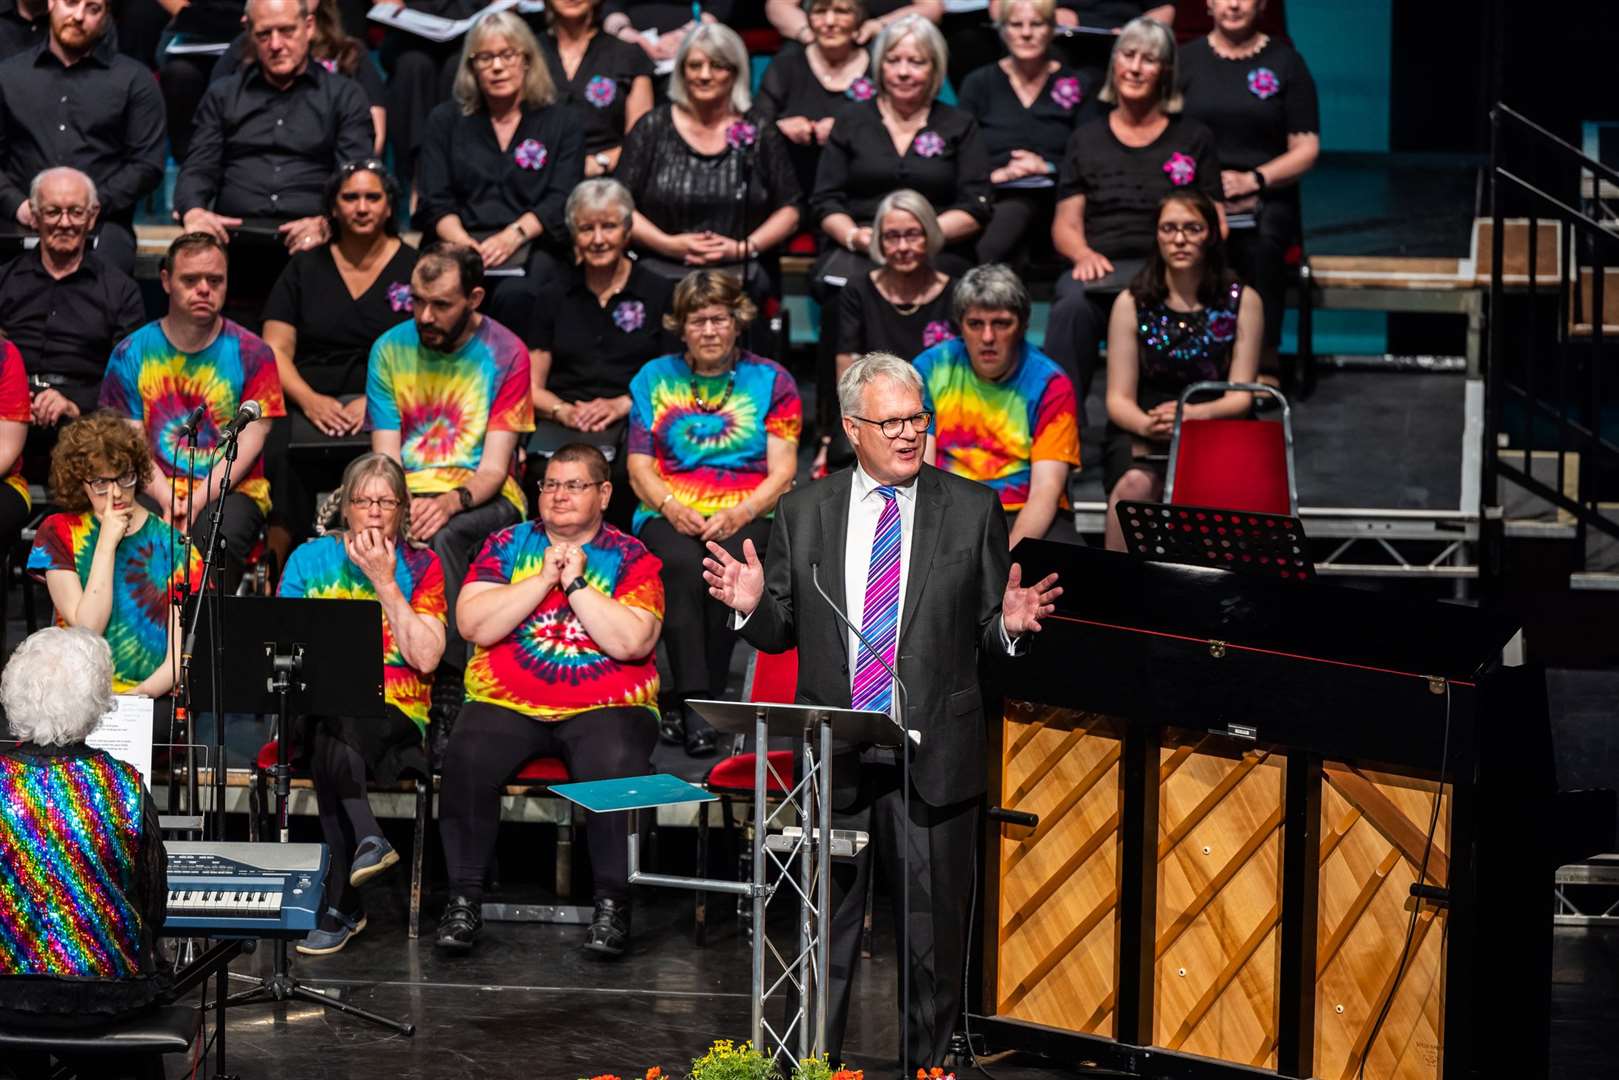 The Rev David Meredith and the Rainbow Singers who were a massive hit.